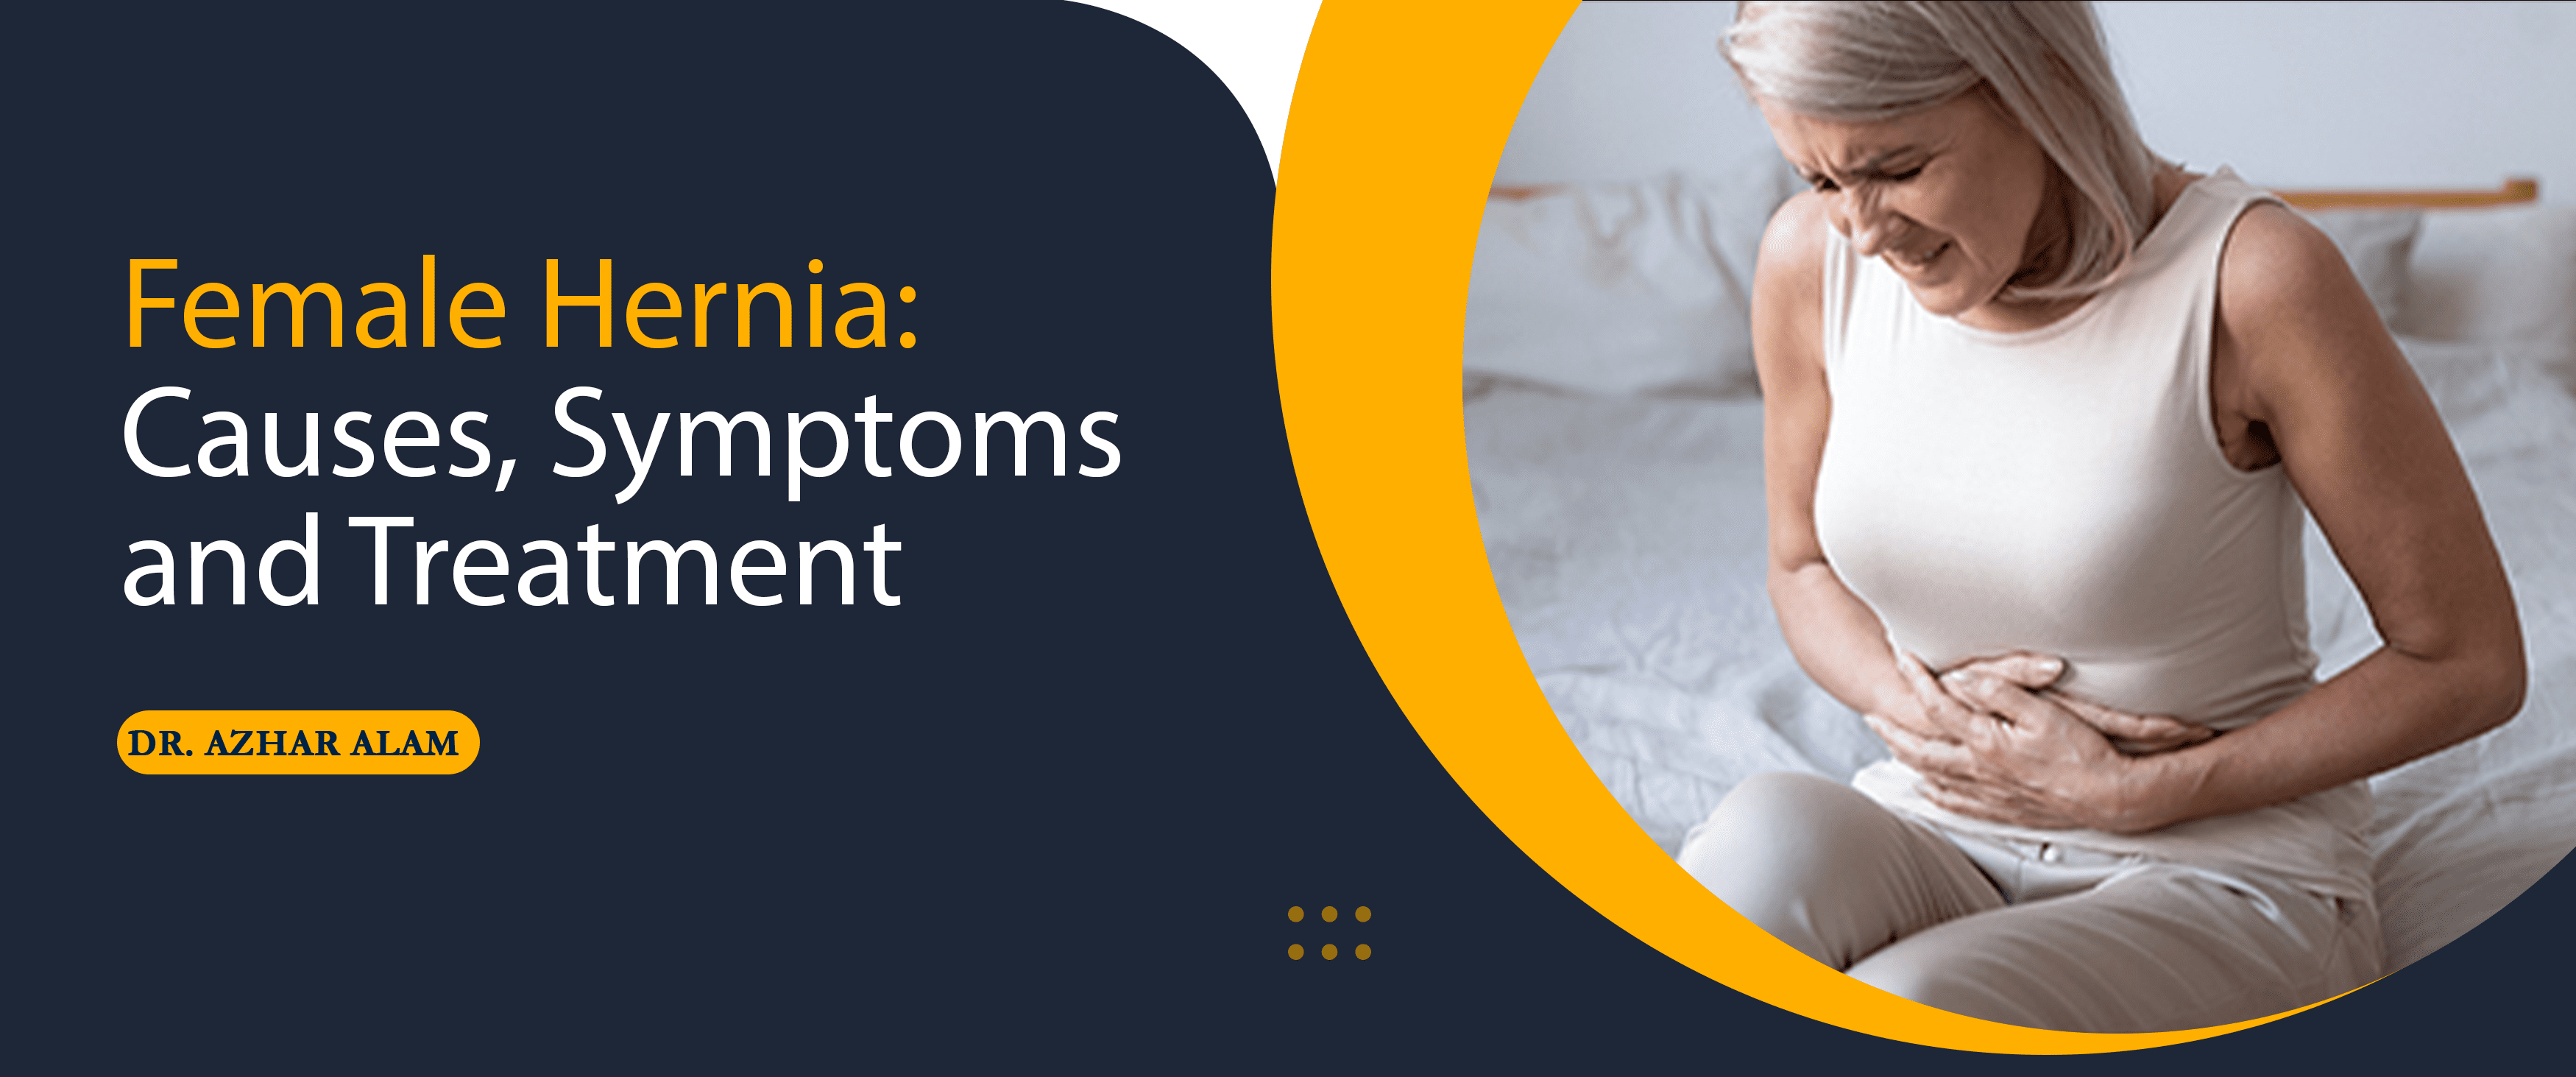 When do you know when it's Hernia, Symtoms, Treatment